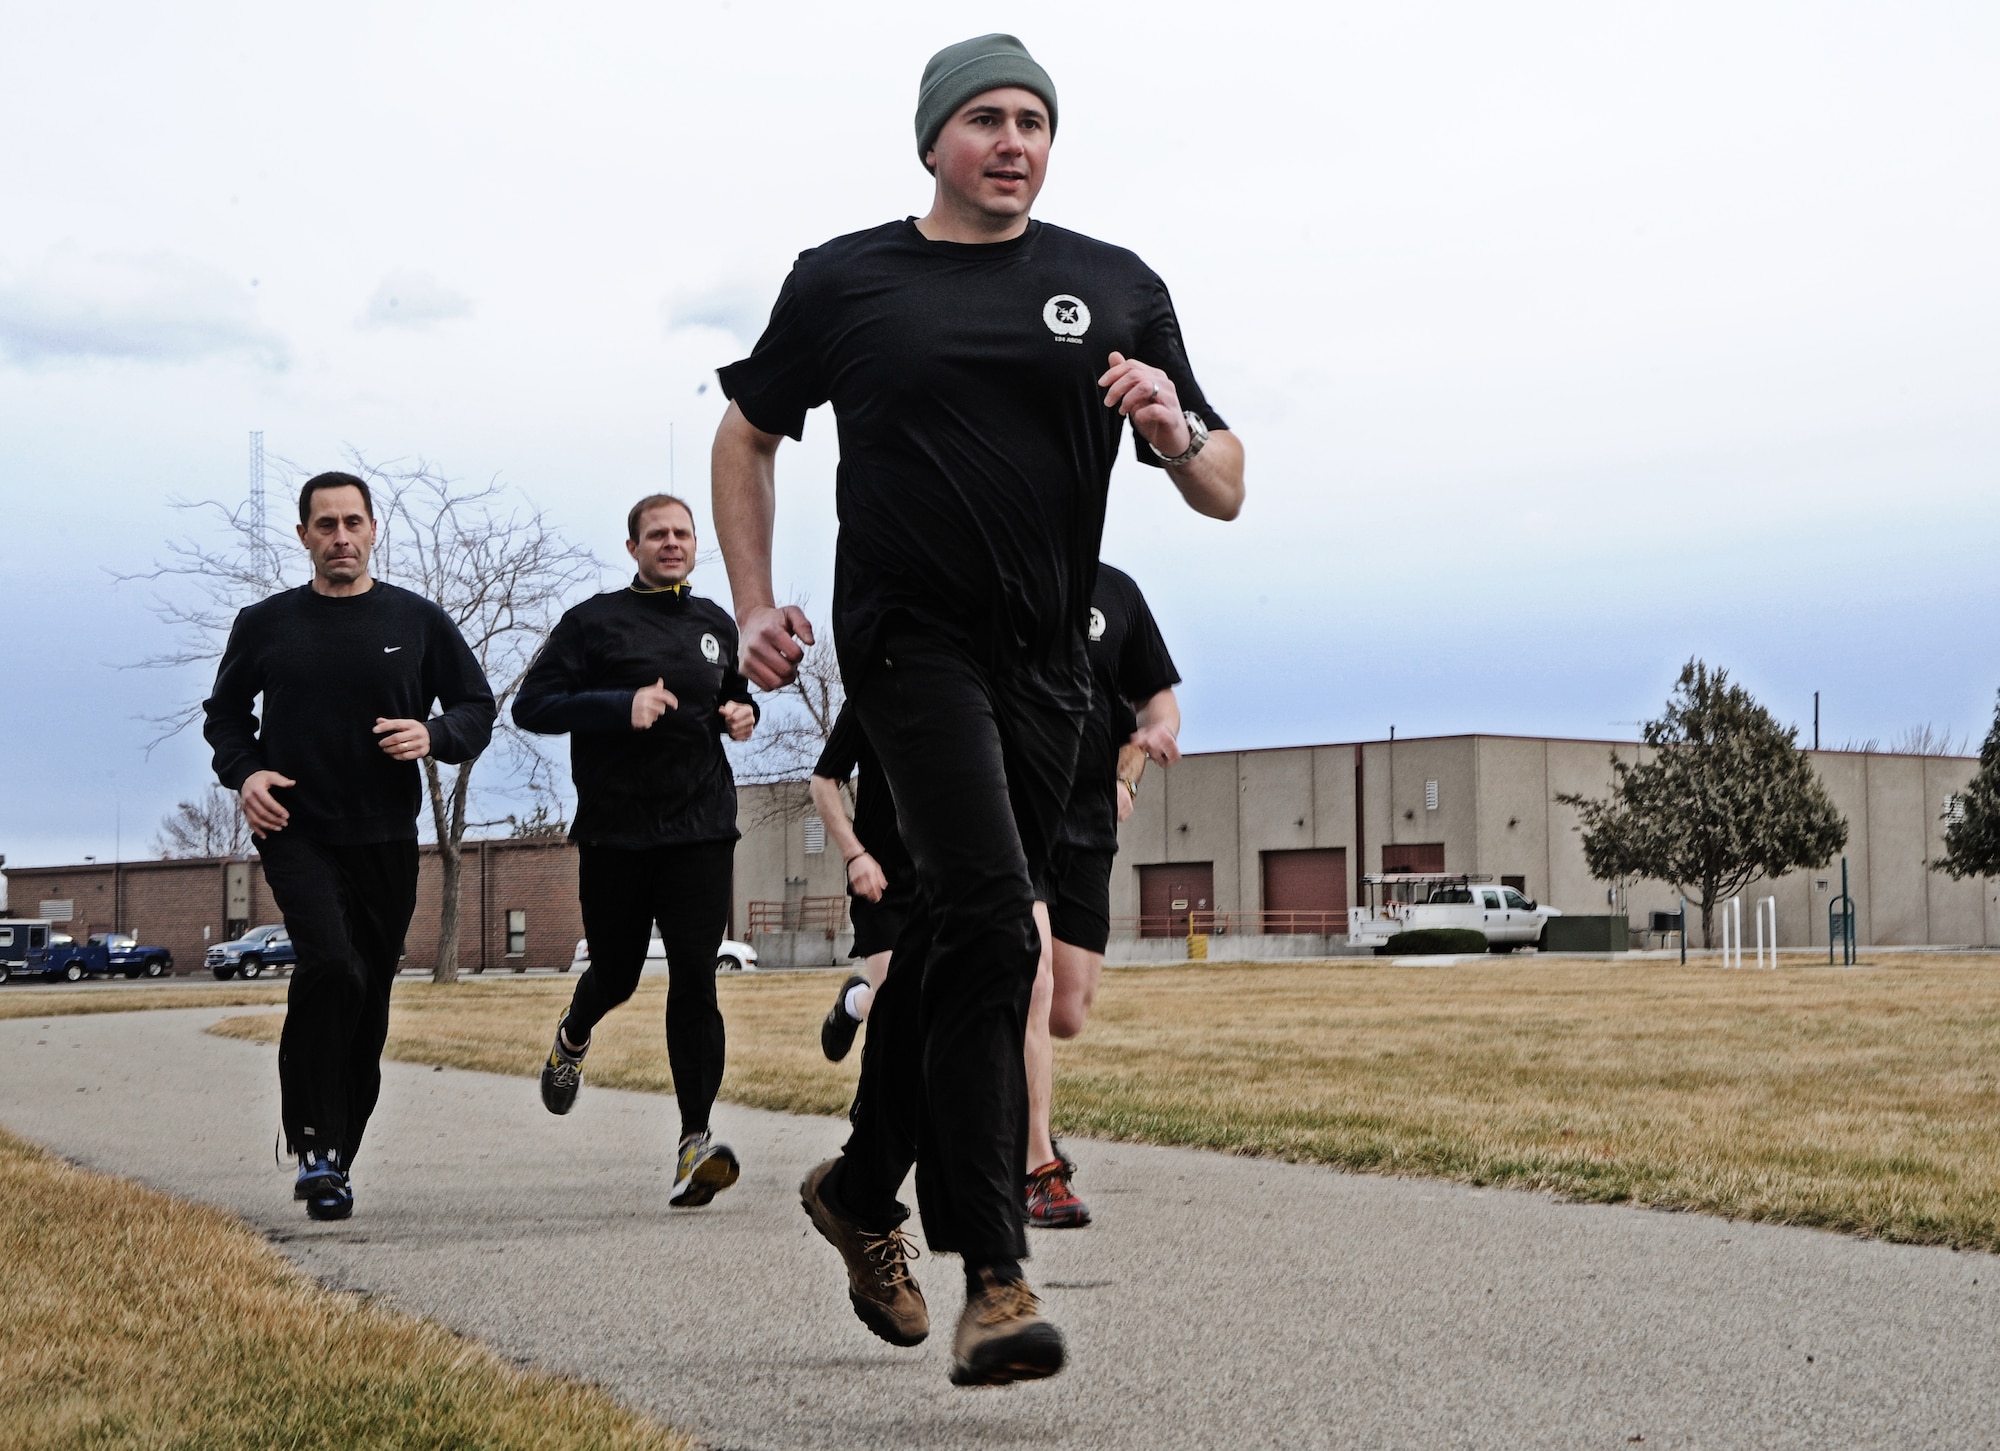 Maj. Shawn Scott, Air Liaison officer, and other members of the 124th Air Support Operations Squadron of the Idaho Air National Guard run laps around the Gowen Field running track March 17. Beginning at 5 p.m. March 17 and lasting until 5 p.m. the following day, more than 30 Idaho ASOS members ran 270 miles to honor three ASOS airmen who were killed in action during the month of March, including Maj. Greg Stone, a former Air Liaison Officer from the 124 ASOS who died March 25, 2003, in Kuwait. The 124th was one of several units from around the world to participate in the inaugural event.